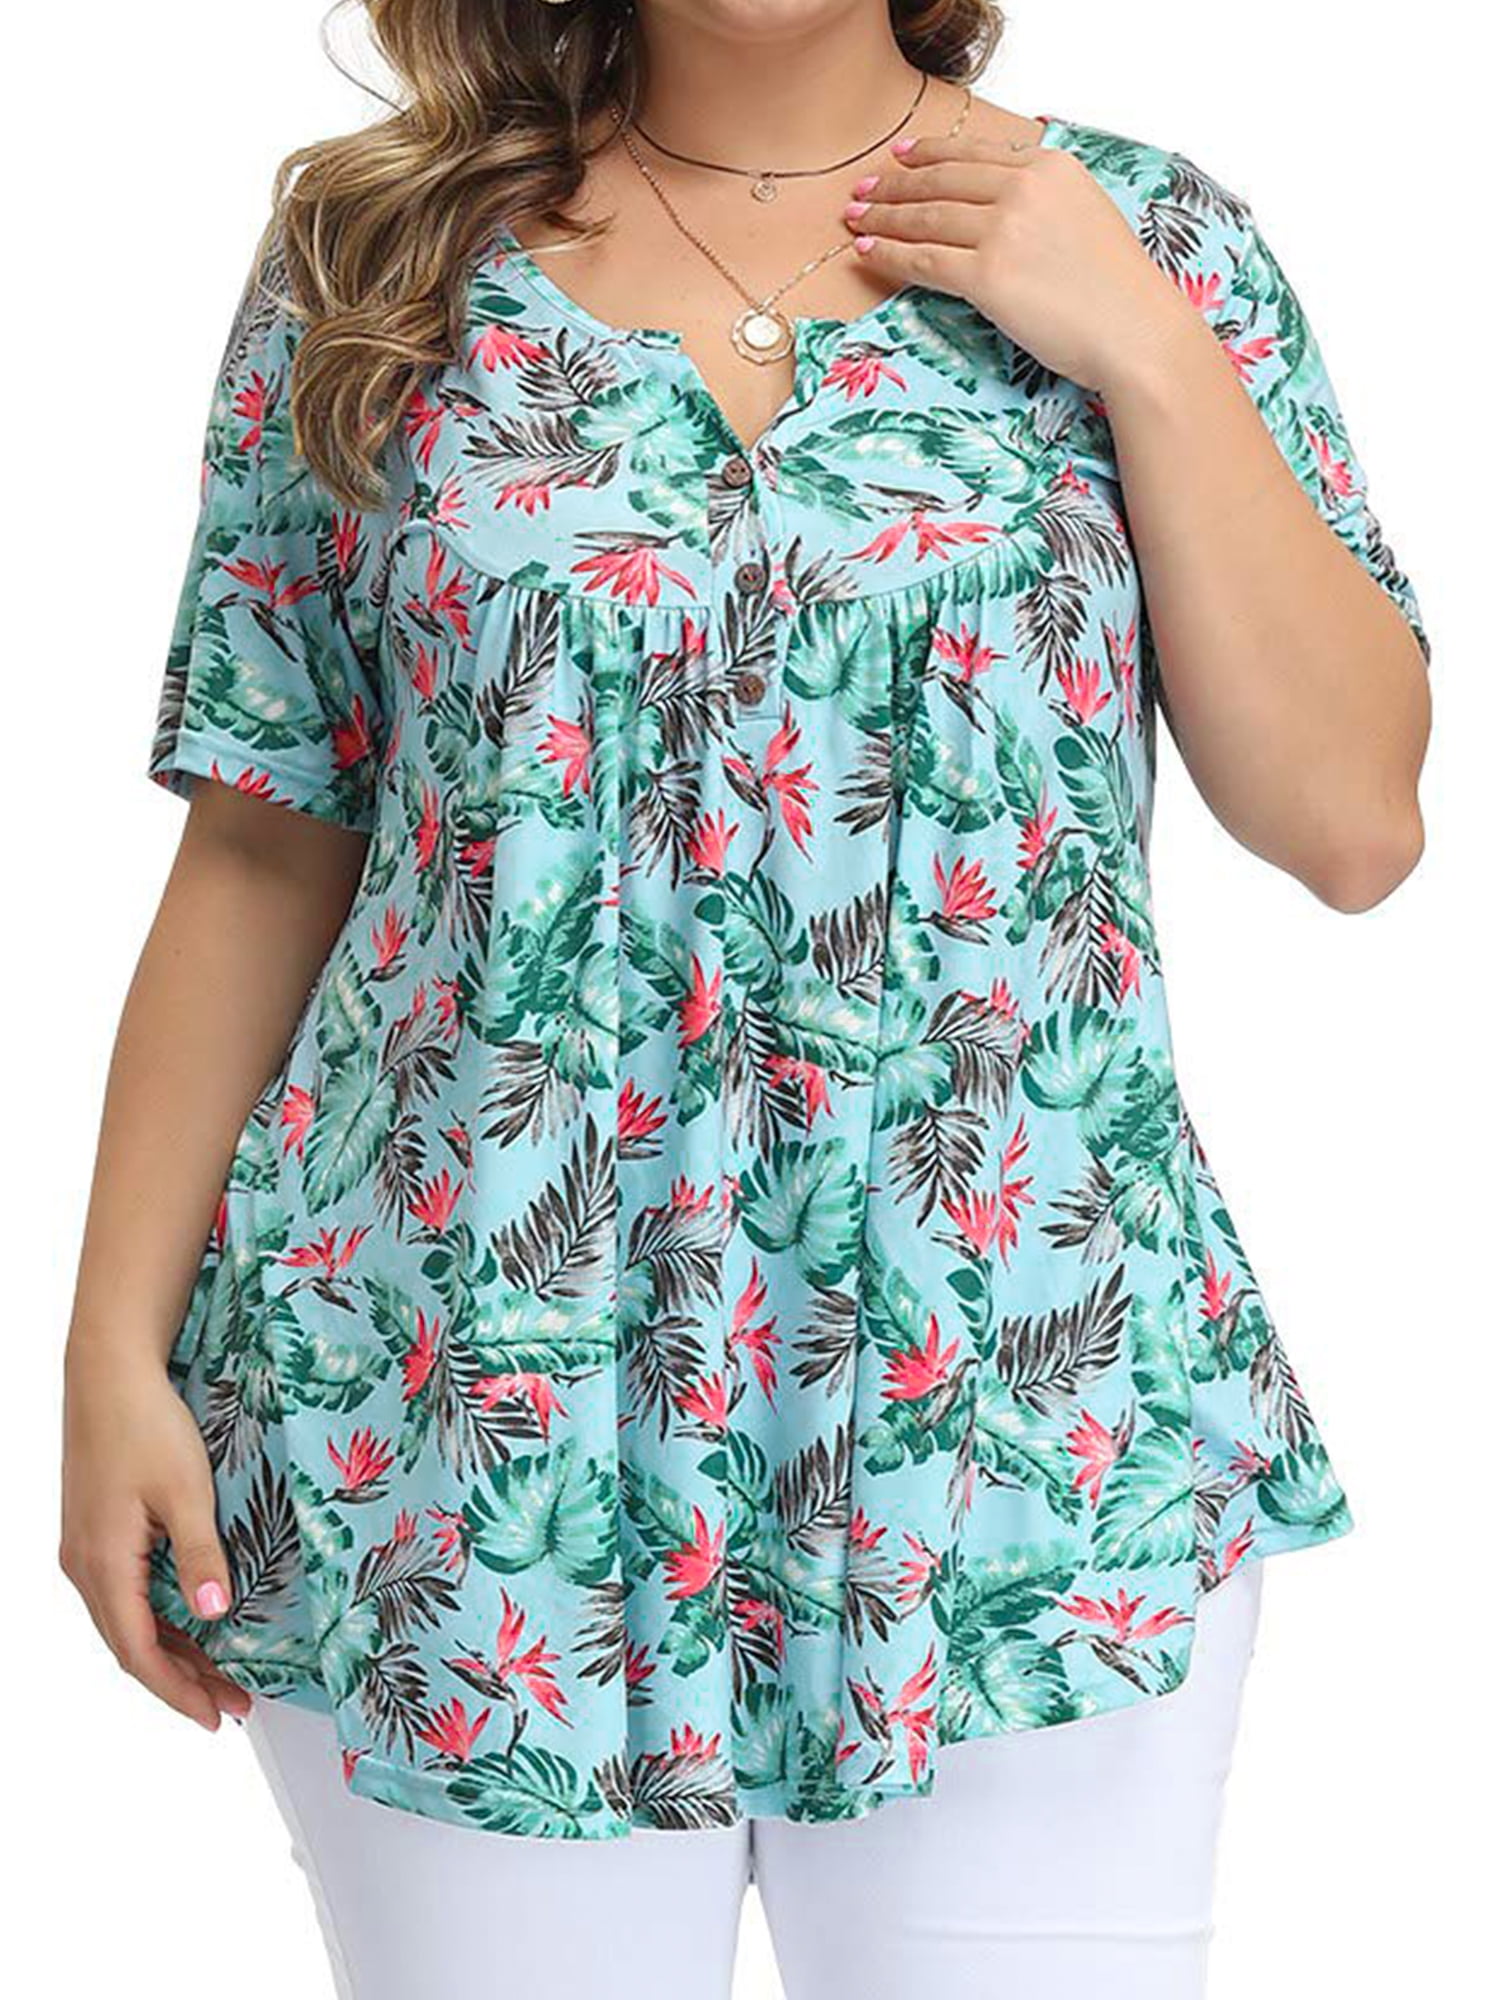 Chama Plus Size Henley Shirt for Women V Neck Button Up Floral